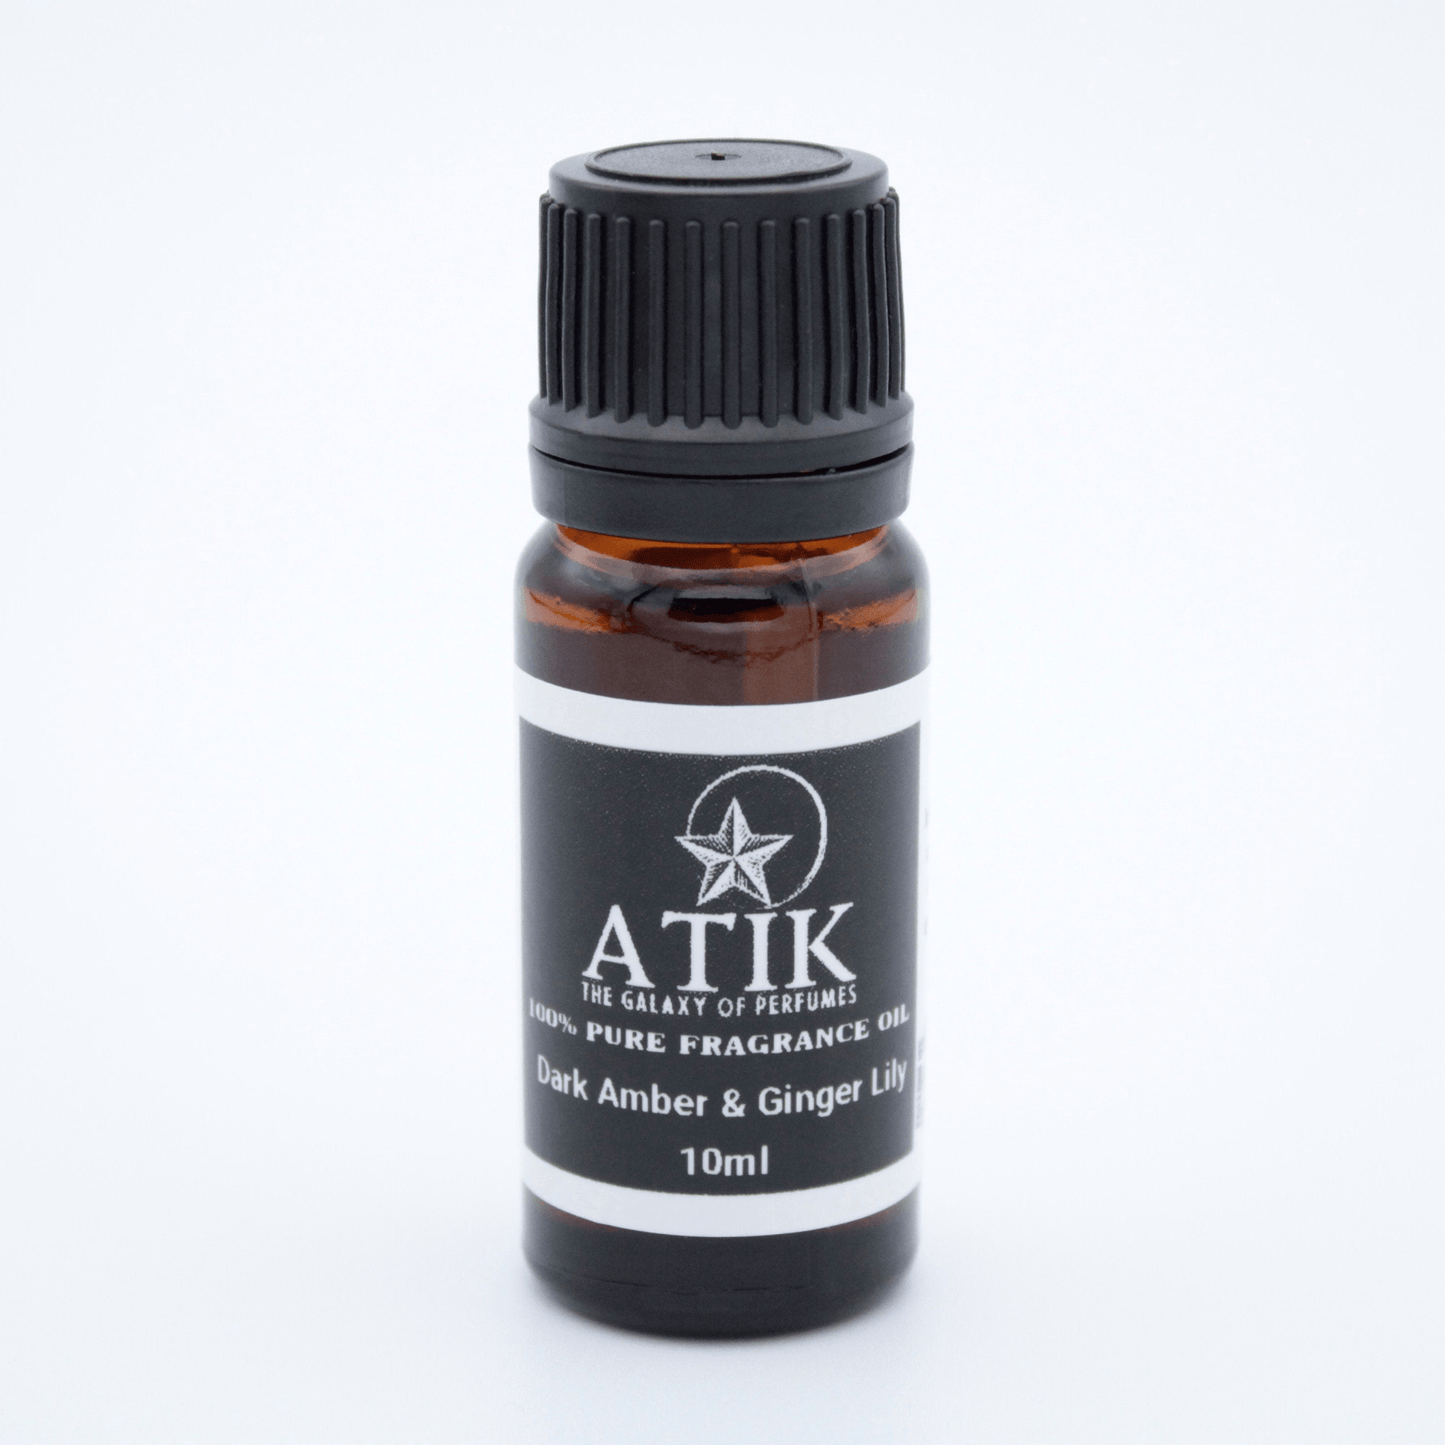 Dark Amber and Ginger Lily Fragrance Oil - Atik Perfumes